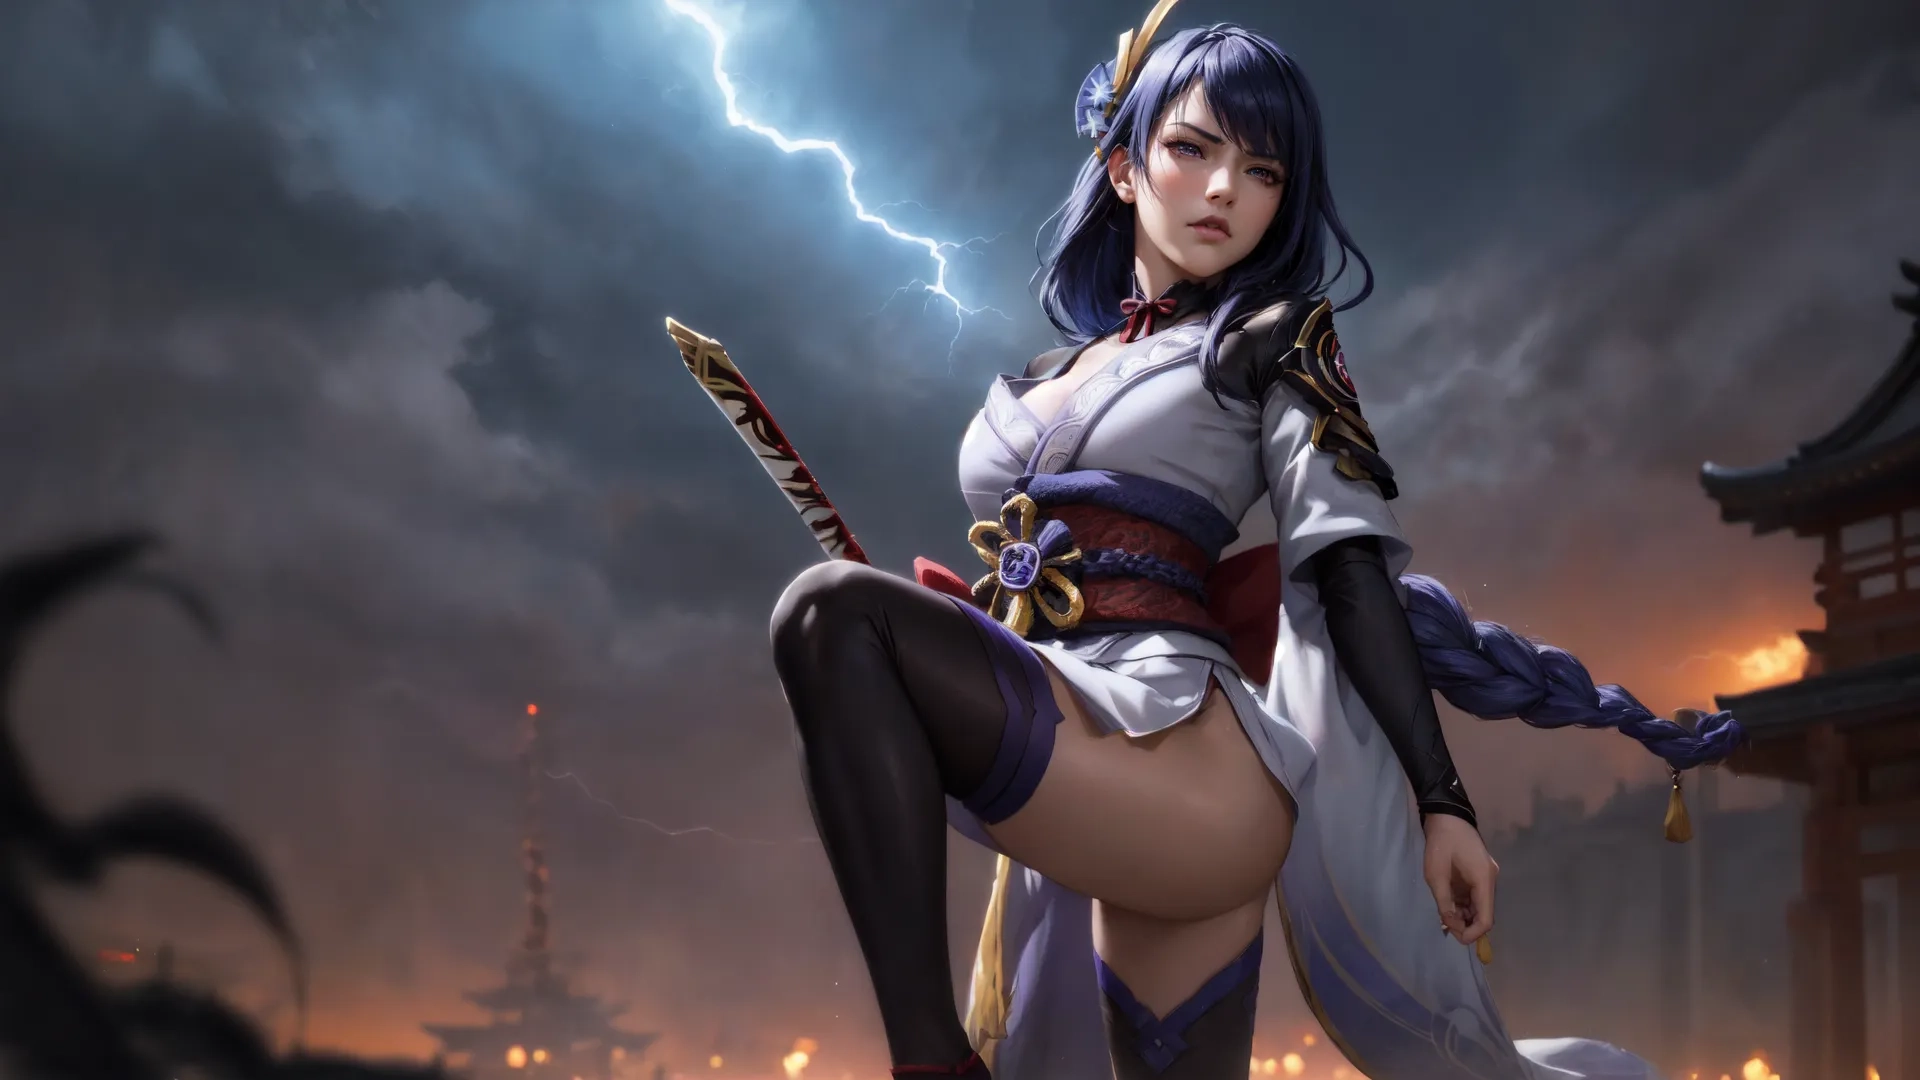 a anime woman with purple hair is posing in front of a temple at night, on fire lights she has short blue hair and blue hair that is lightning
